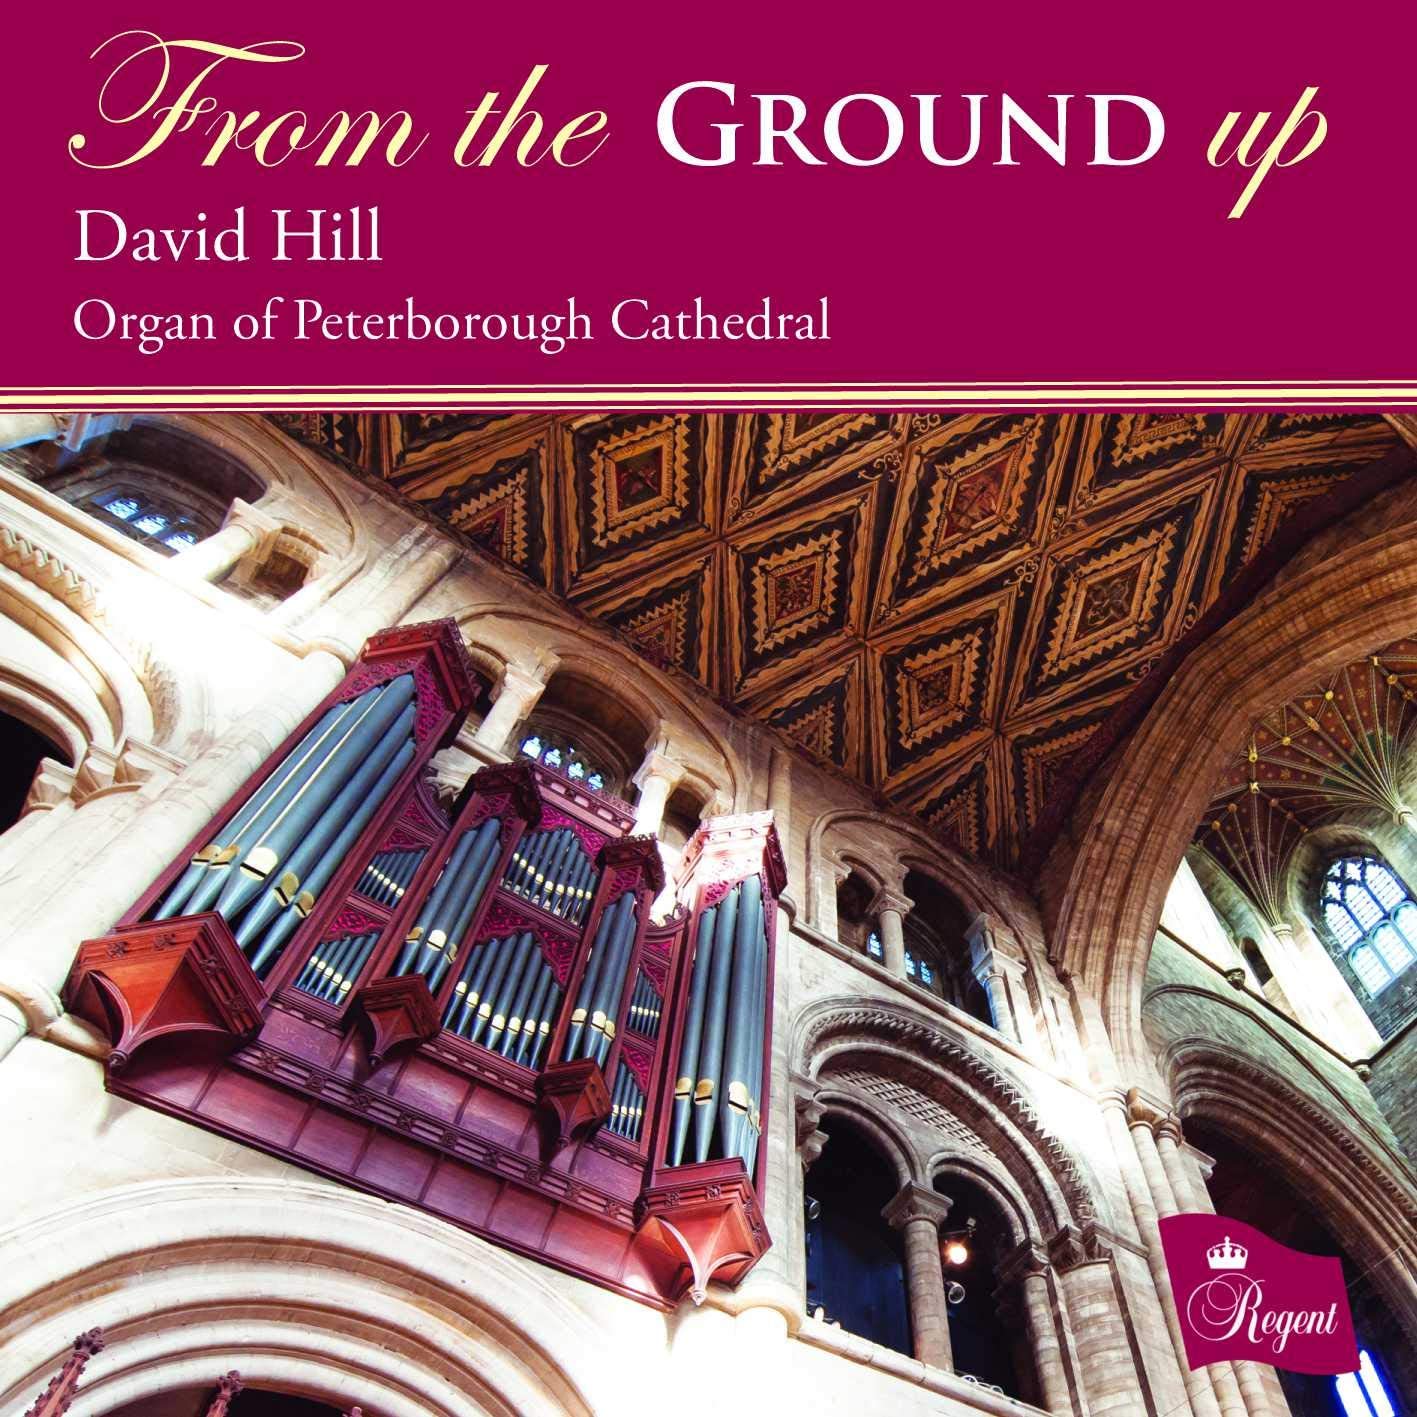 REGCD539. David Hill: From the Ground Up